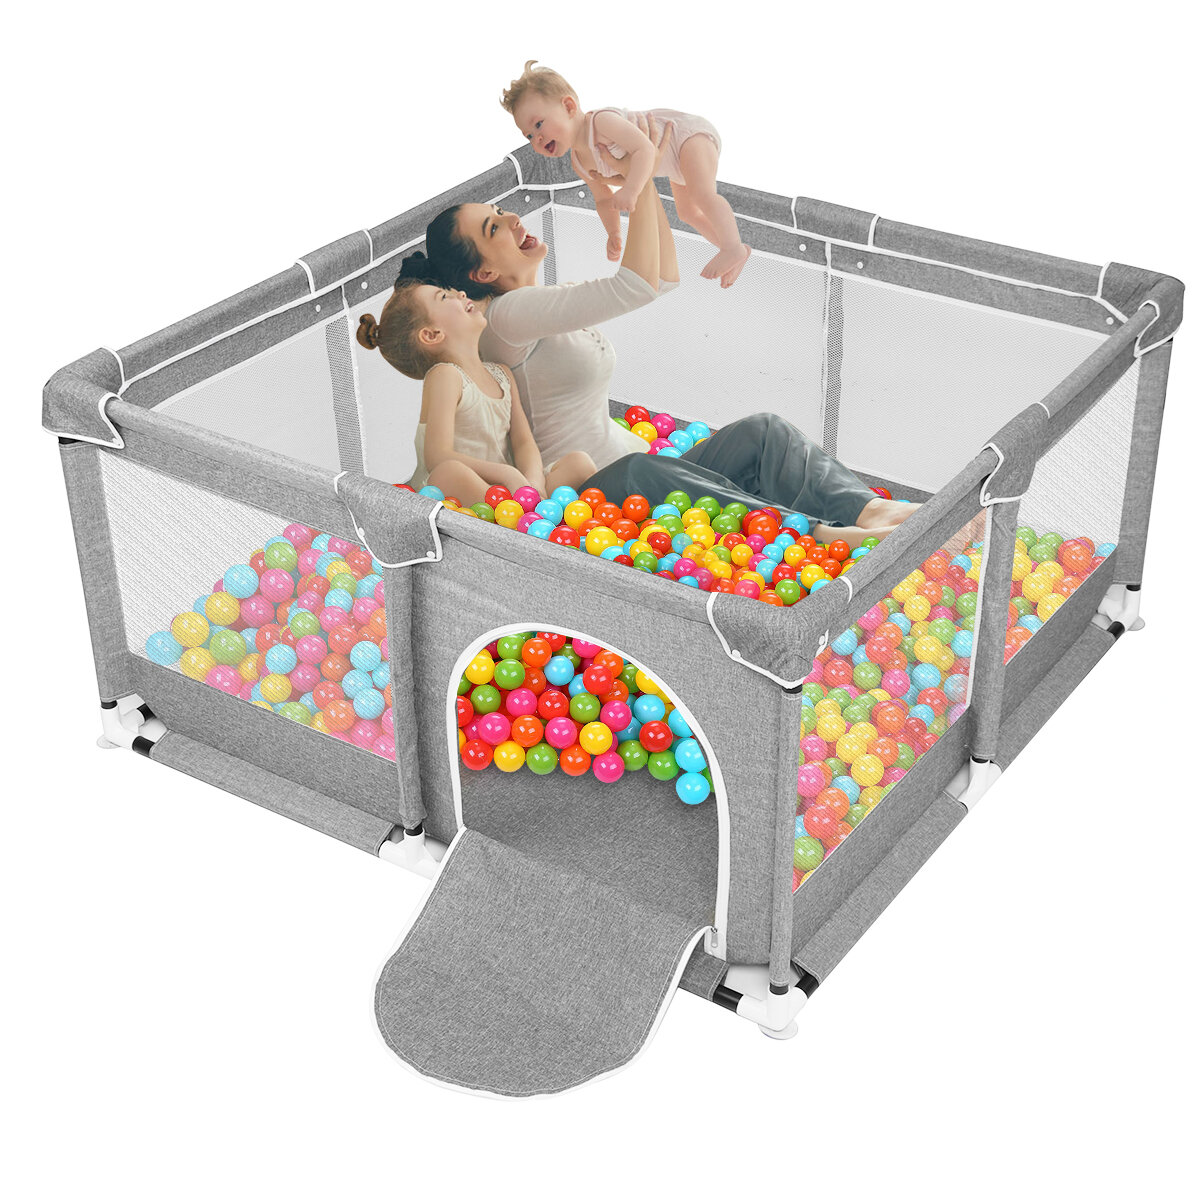 Image of 47'' Kids Playpen Playing House Indoor Outdoor Baby Toddler Game Pool Fence Tent